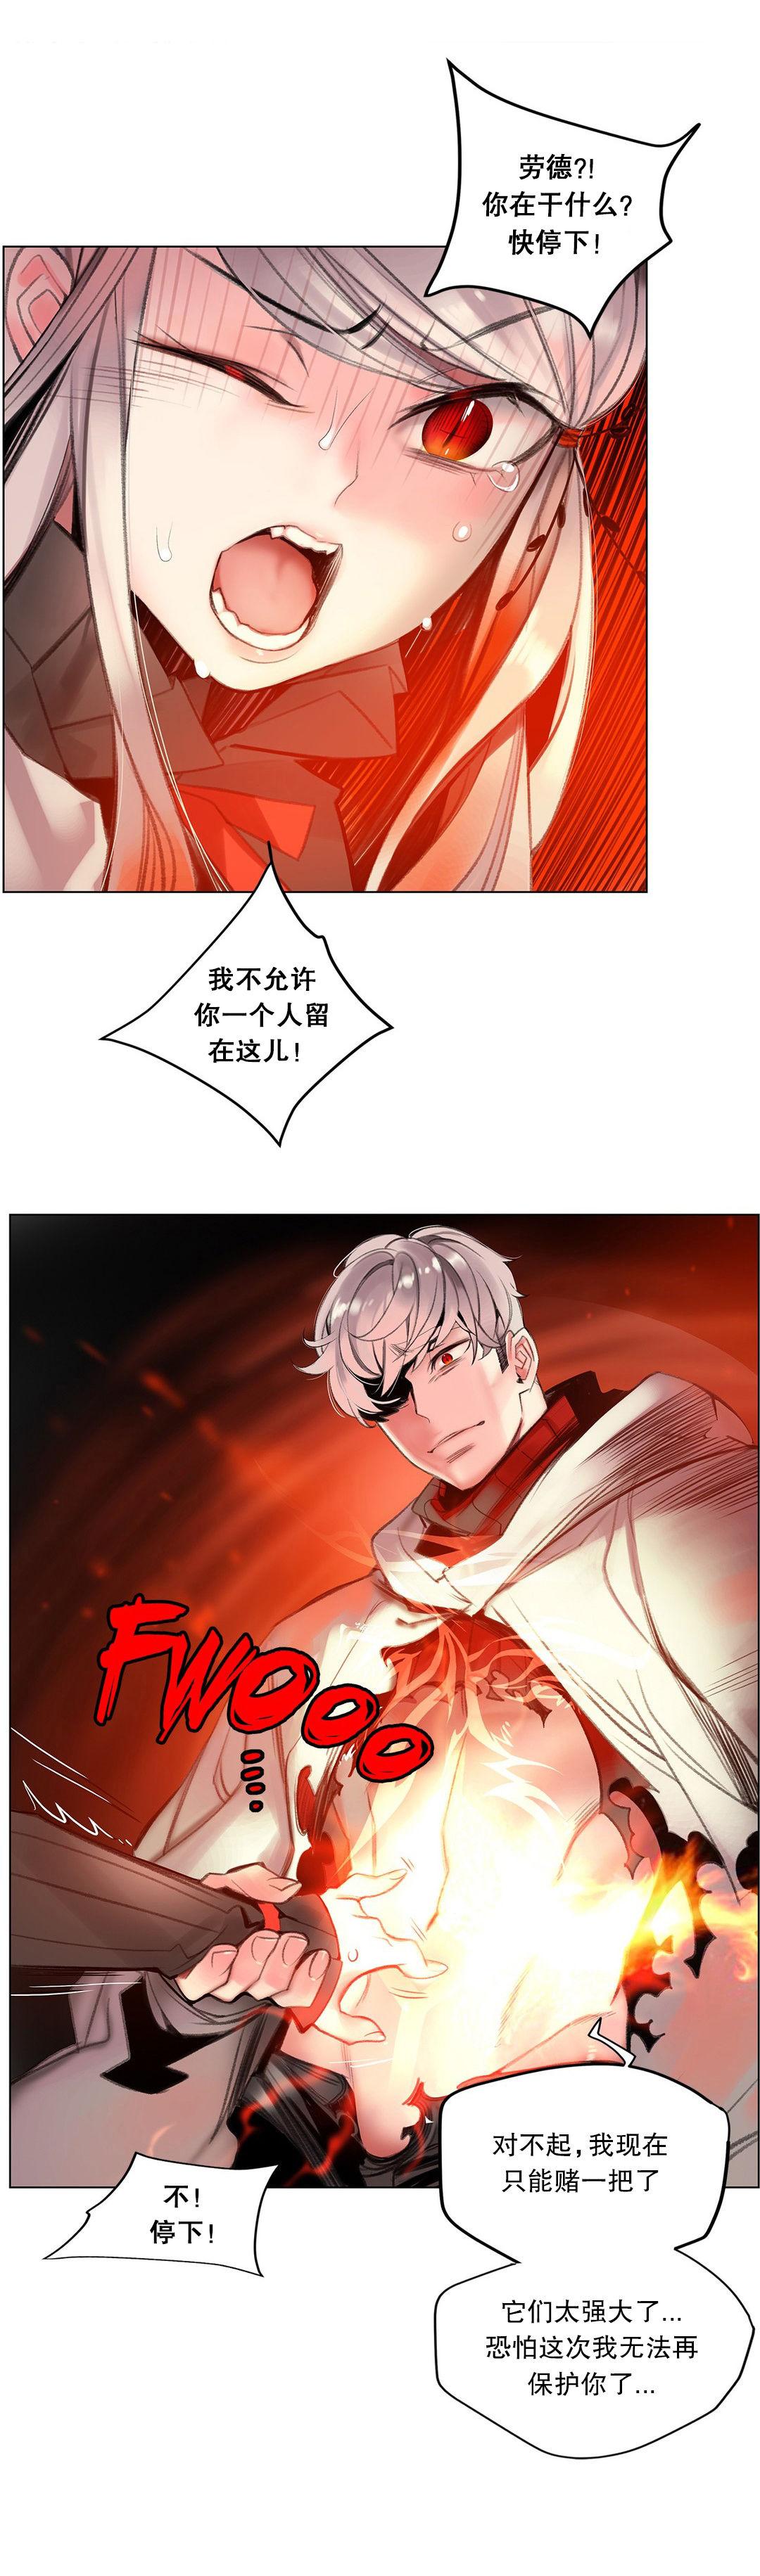 [Juder] Lilith`s Cord (第二季) Ch.61-67 [Chinese] [aaatwist个人汉化] [Ongoing] 252